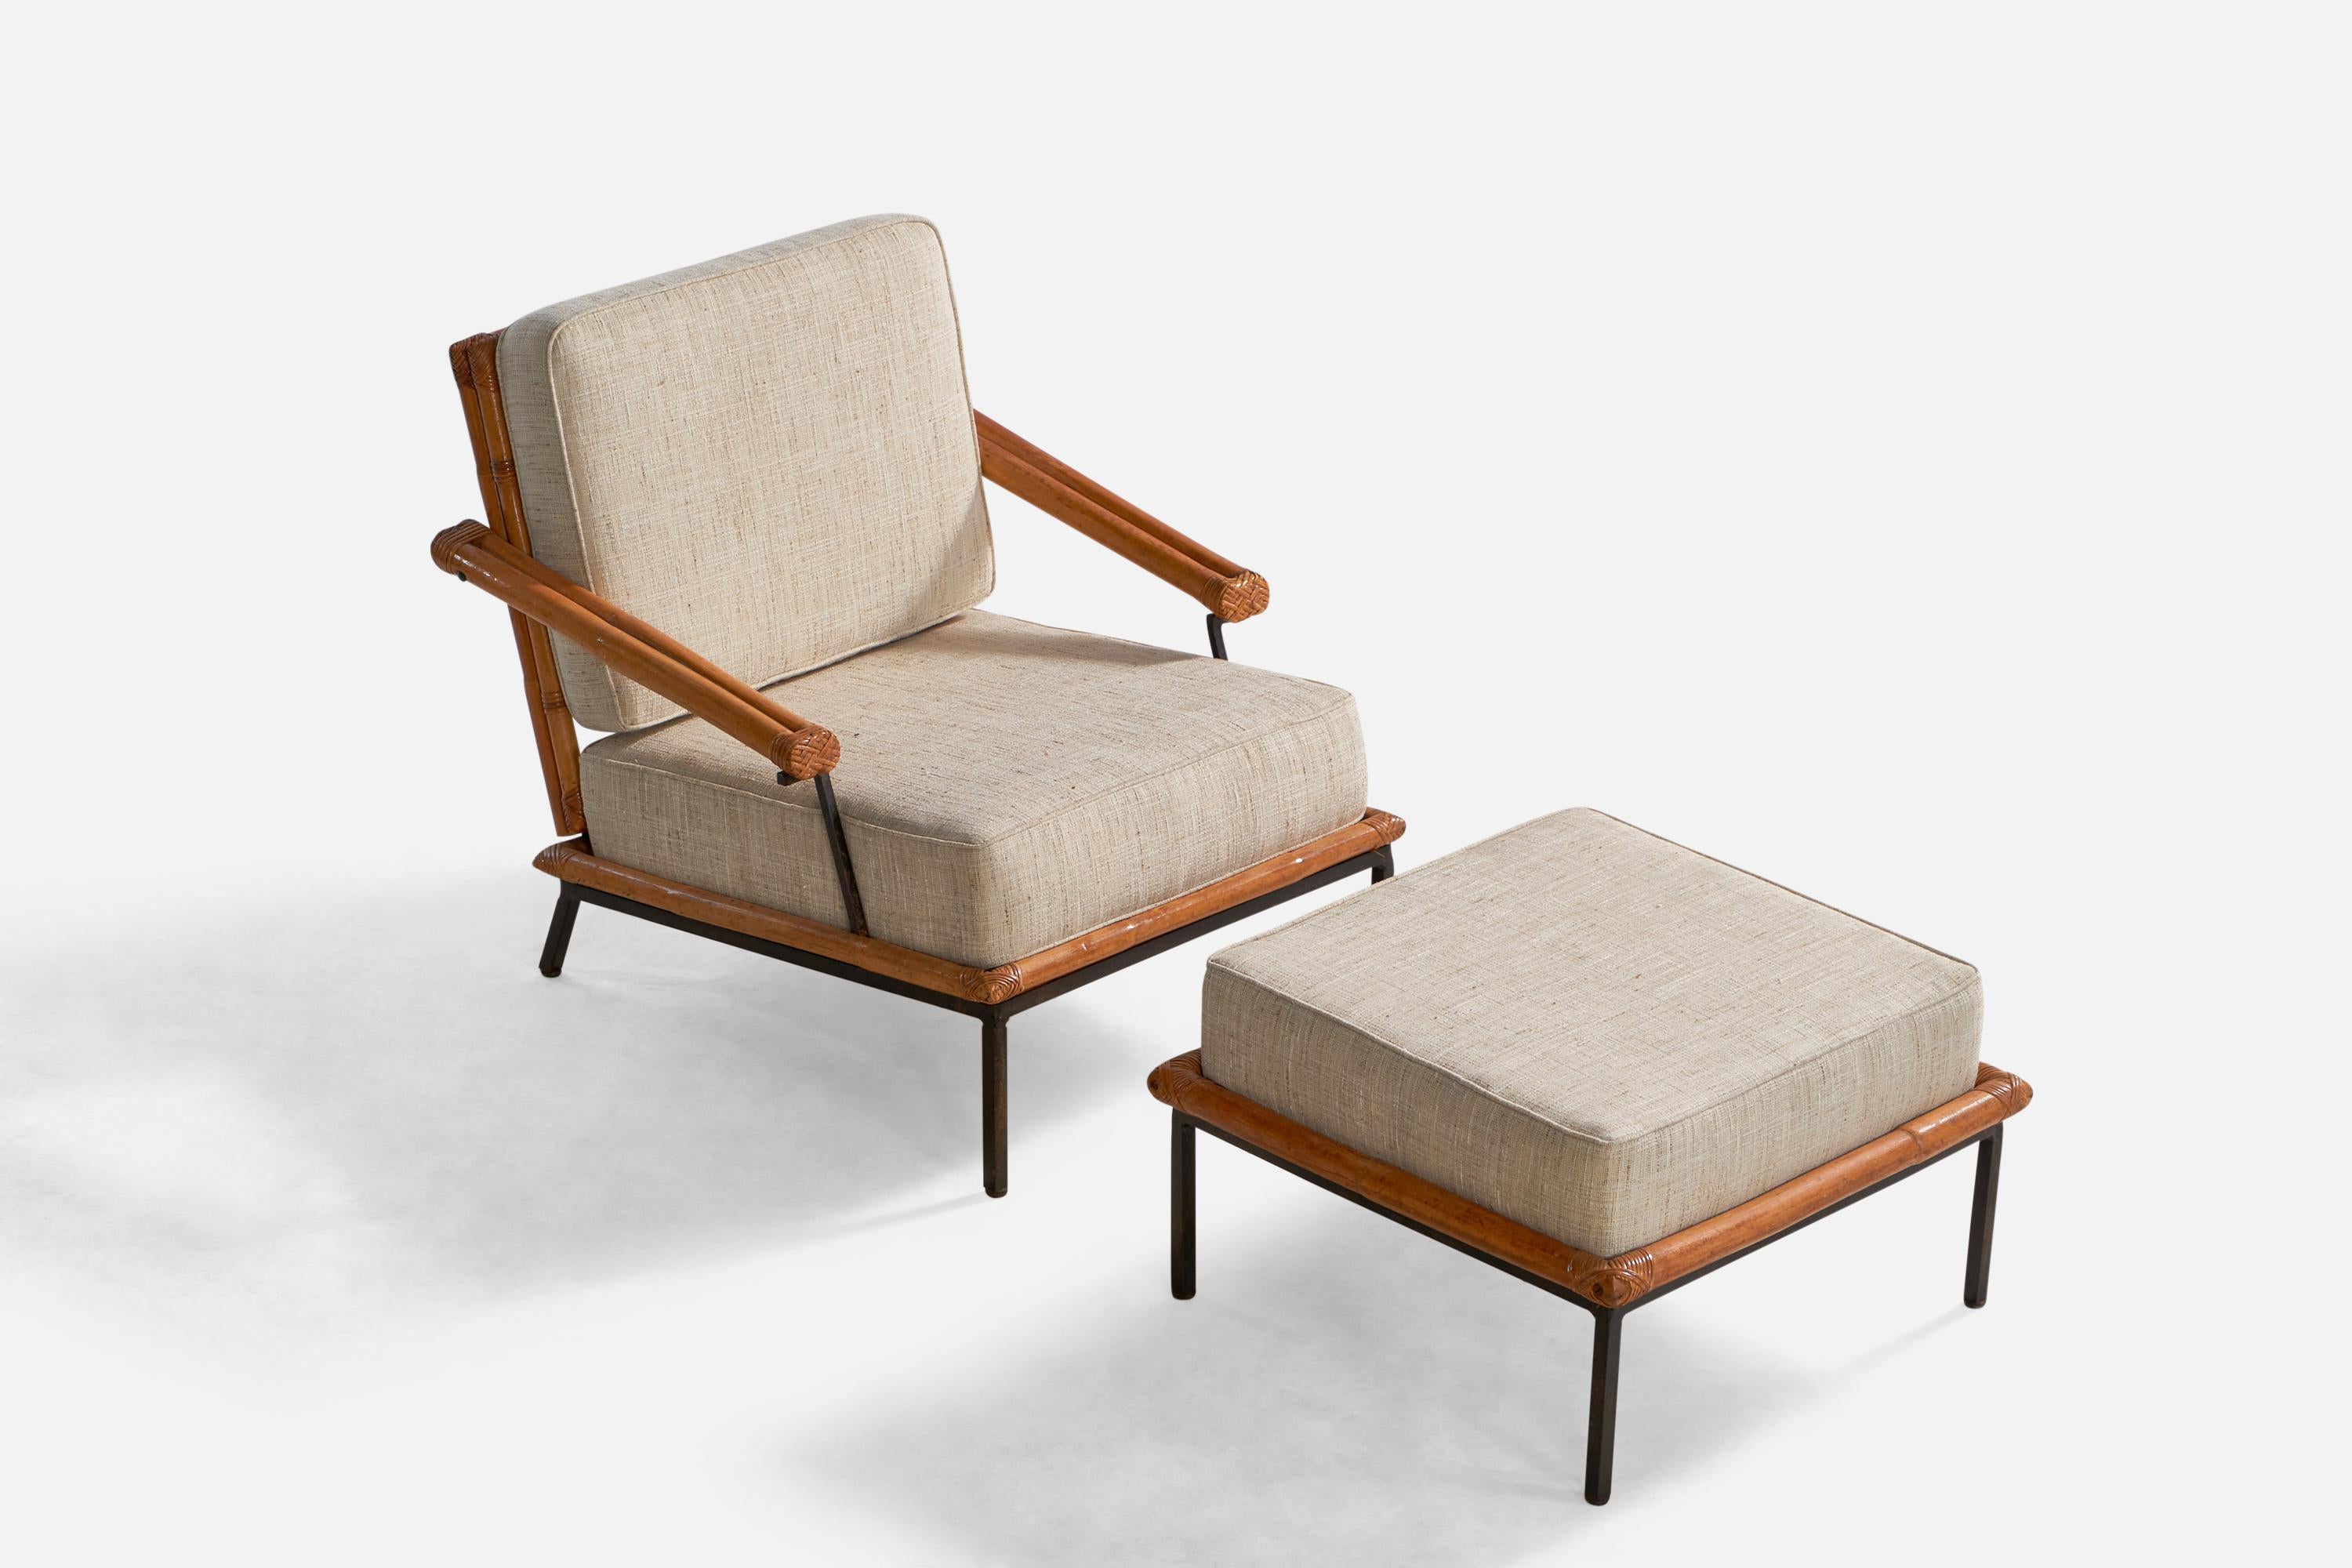 A black-painted iron, bamboo and off-white fabric lounge chair with ottoman designed and produced in the US, 1950s. 

Seat height: 15.75”
Dimensions of ottoman: 15” H x 25” W x 25.25” D